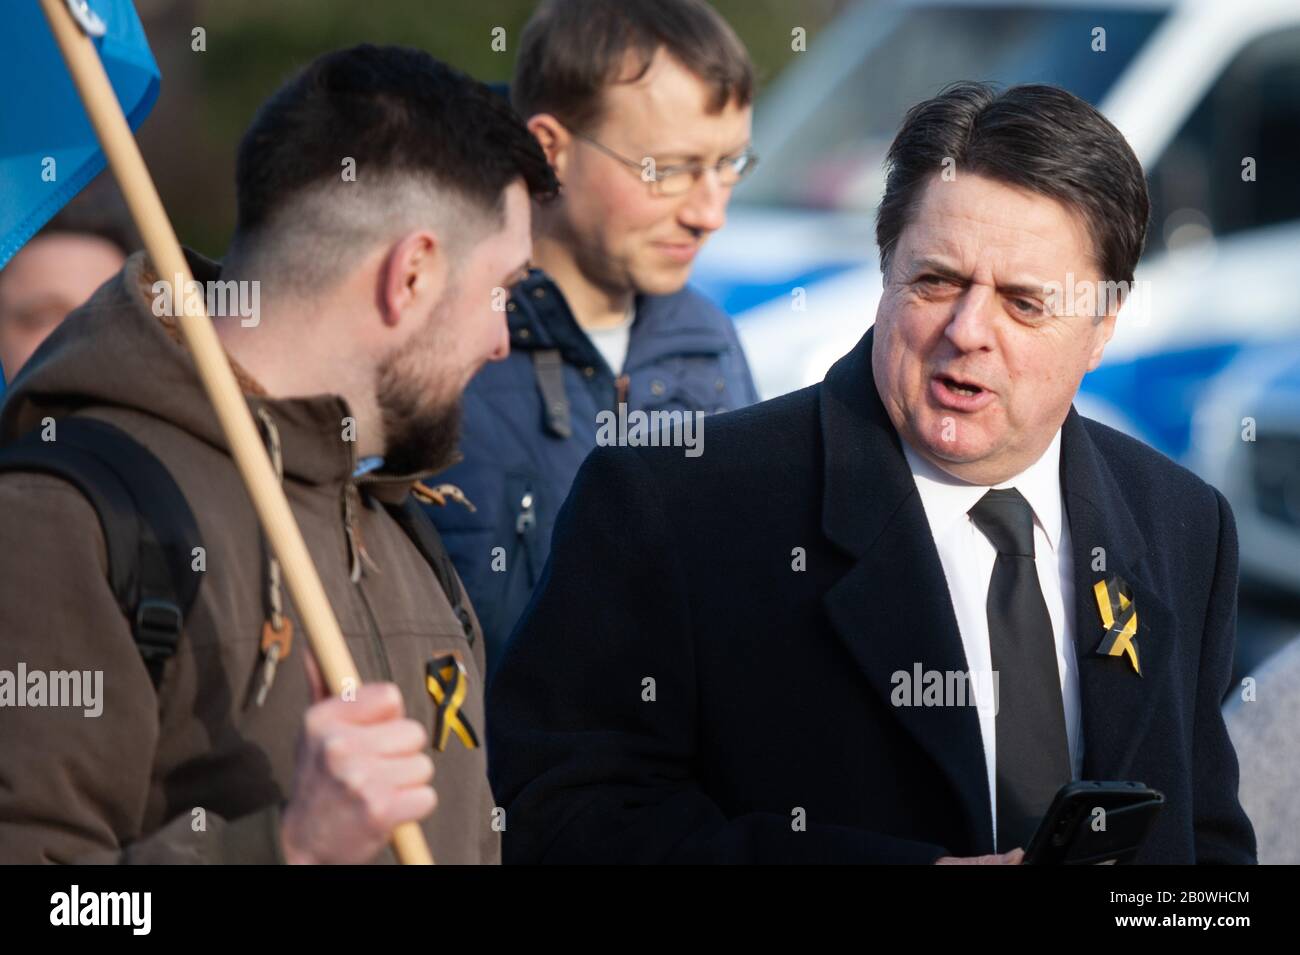 15th February 2020. Dresden, Saxony, Germany. Pictured: Nick Griffin, former member of the European Parliament and past president of the British Natio Stock Photo